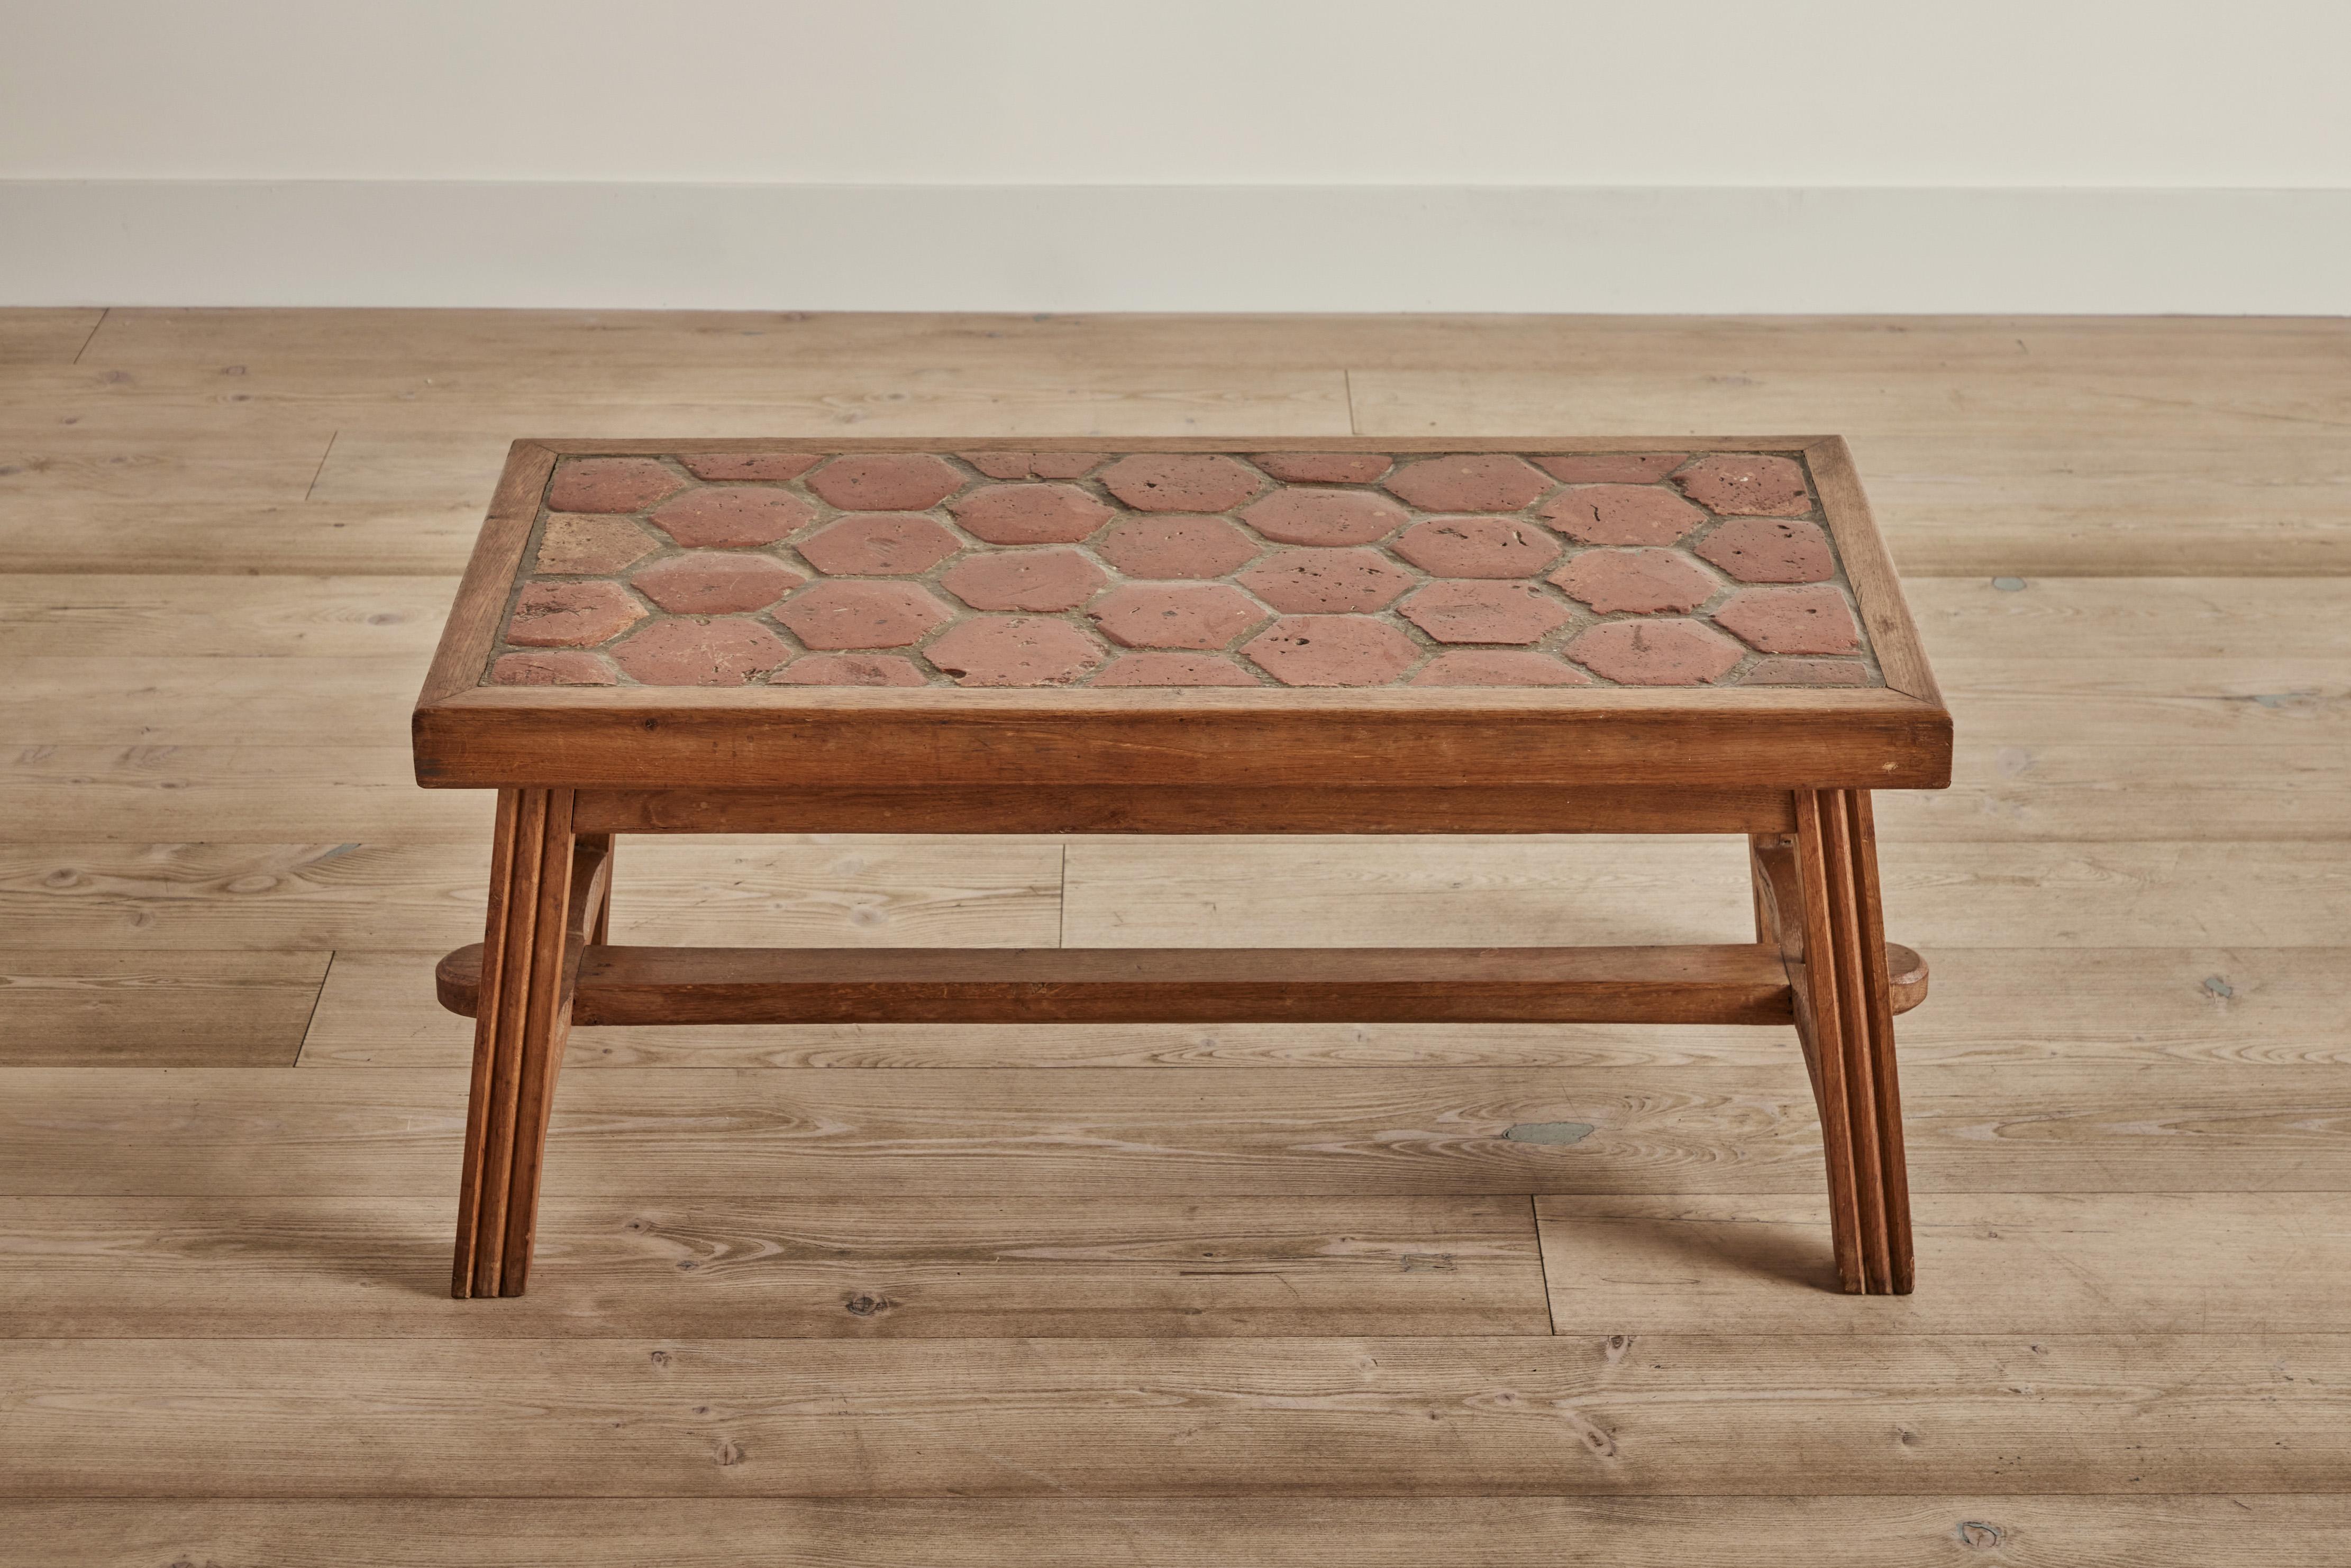 1960s wood and terracotta tile top coffee table from France. Wear on tile and wood is consistent with age and use.